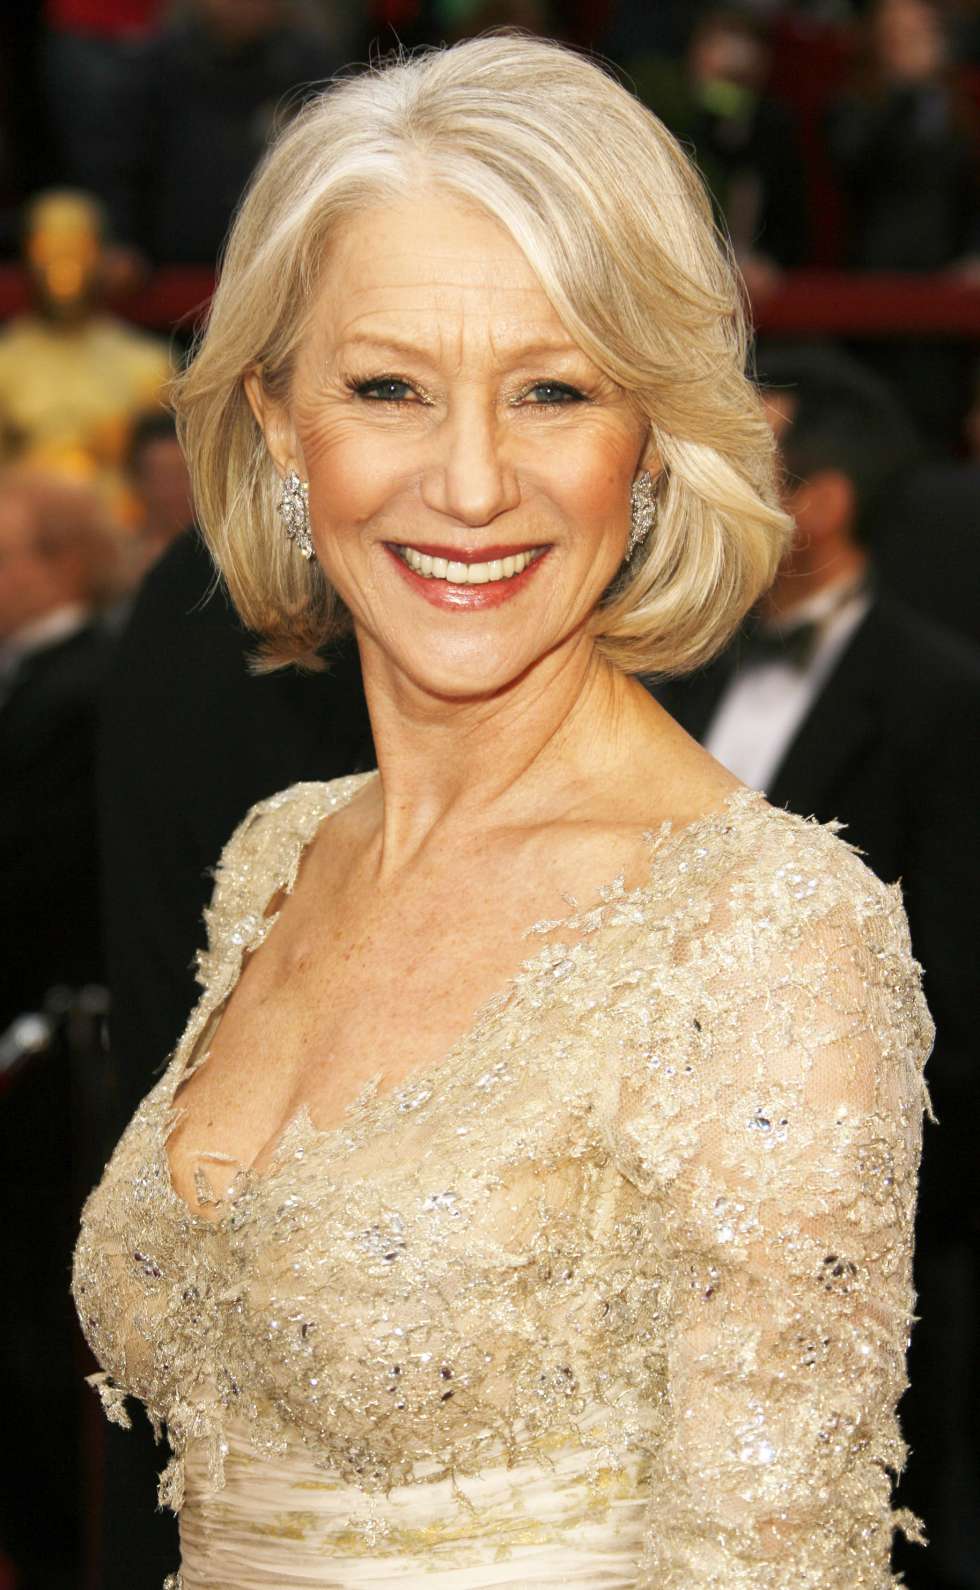 Mother Of The Bride Fashion Inspired By Helen Mirren